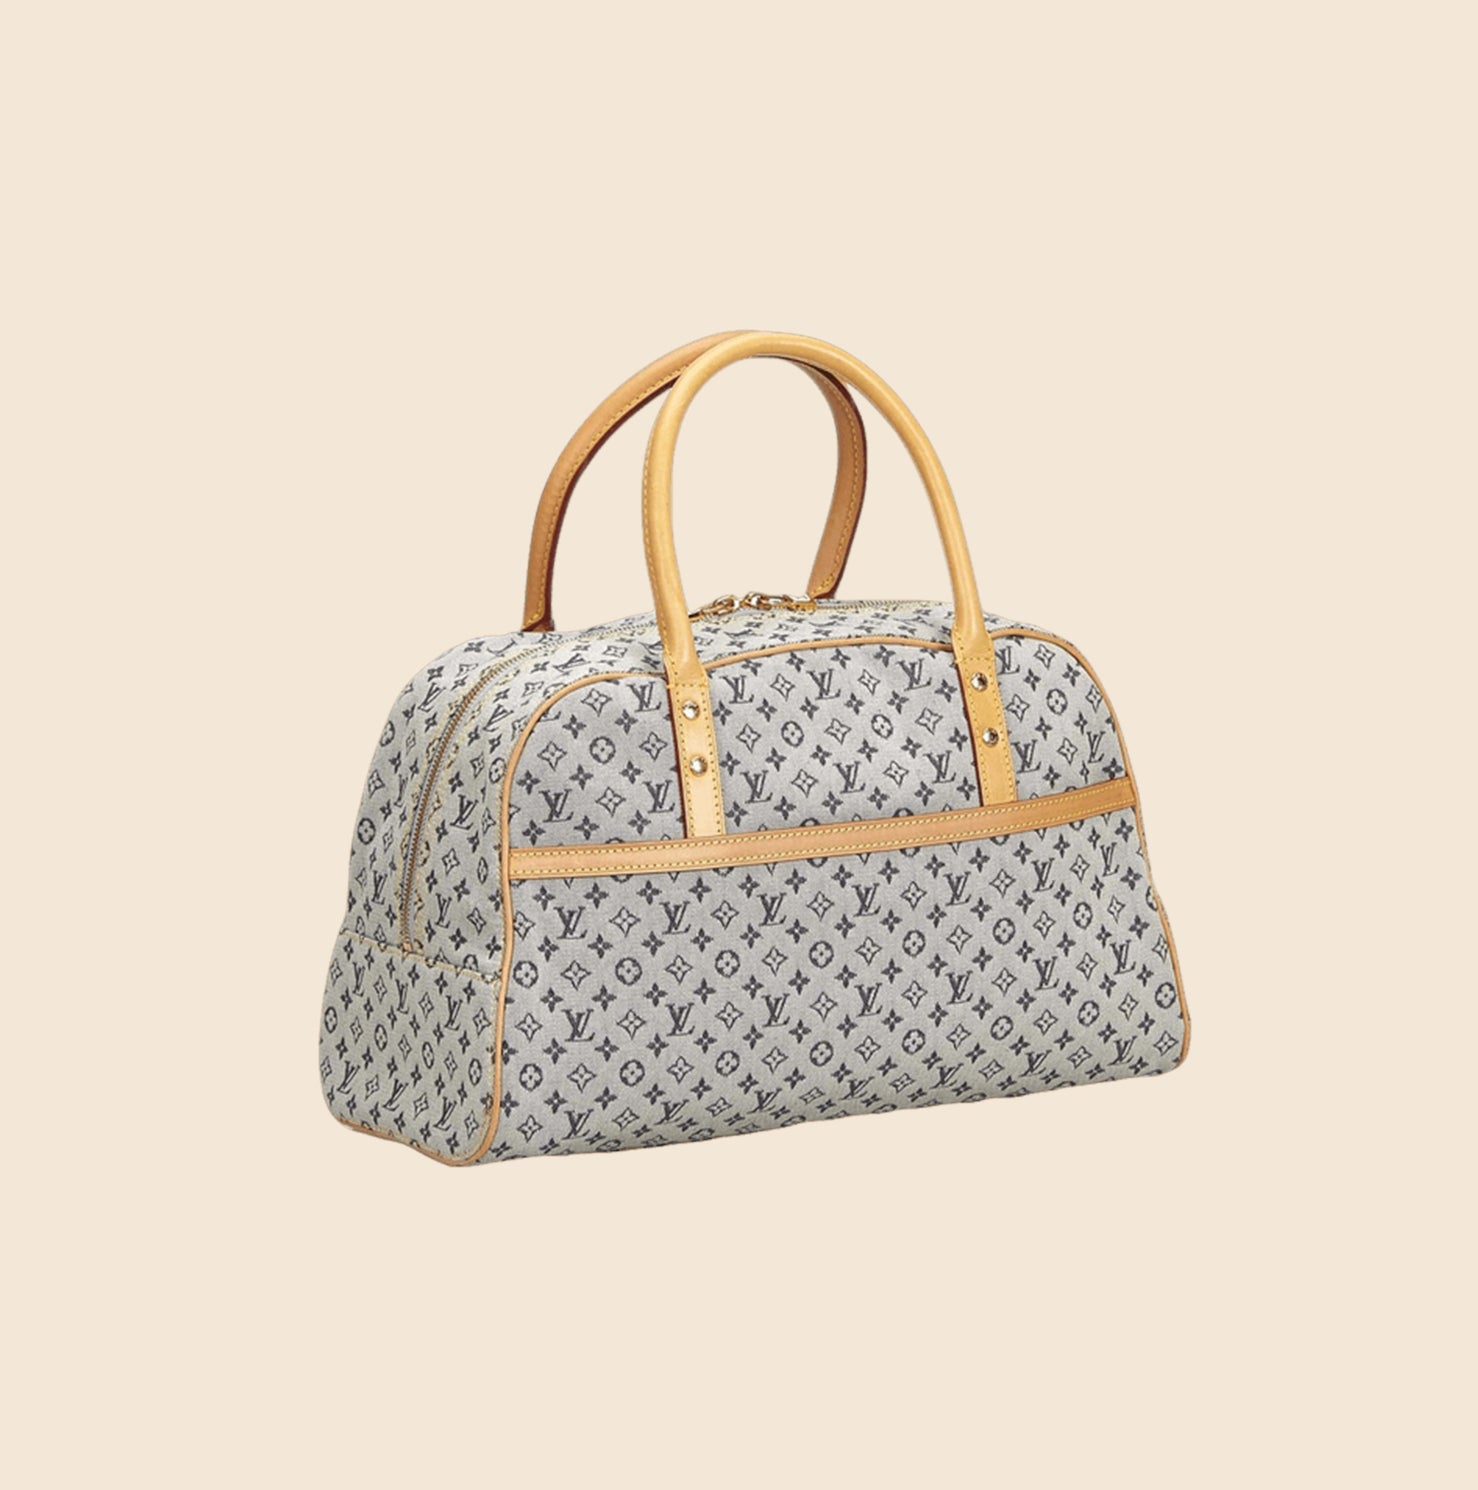 Louis Vuitton Travel Bag in Central Division - Bags, Goodnews